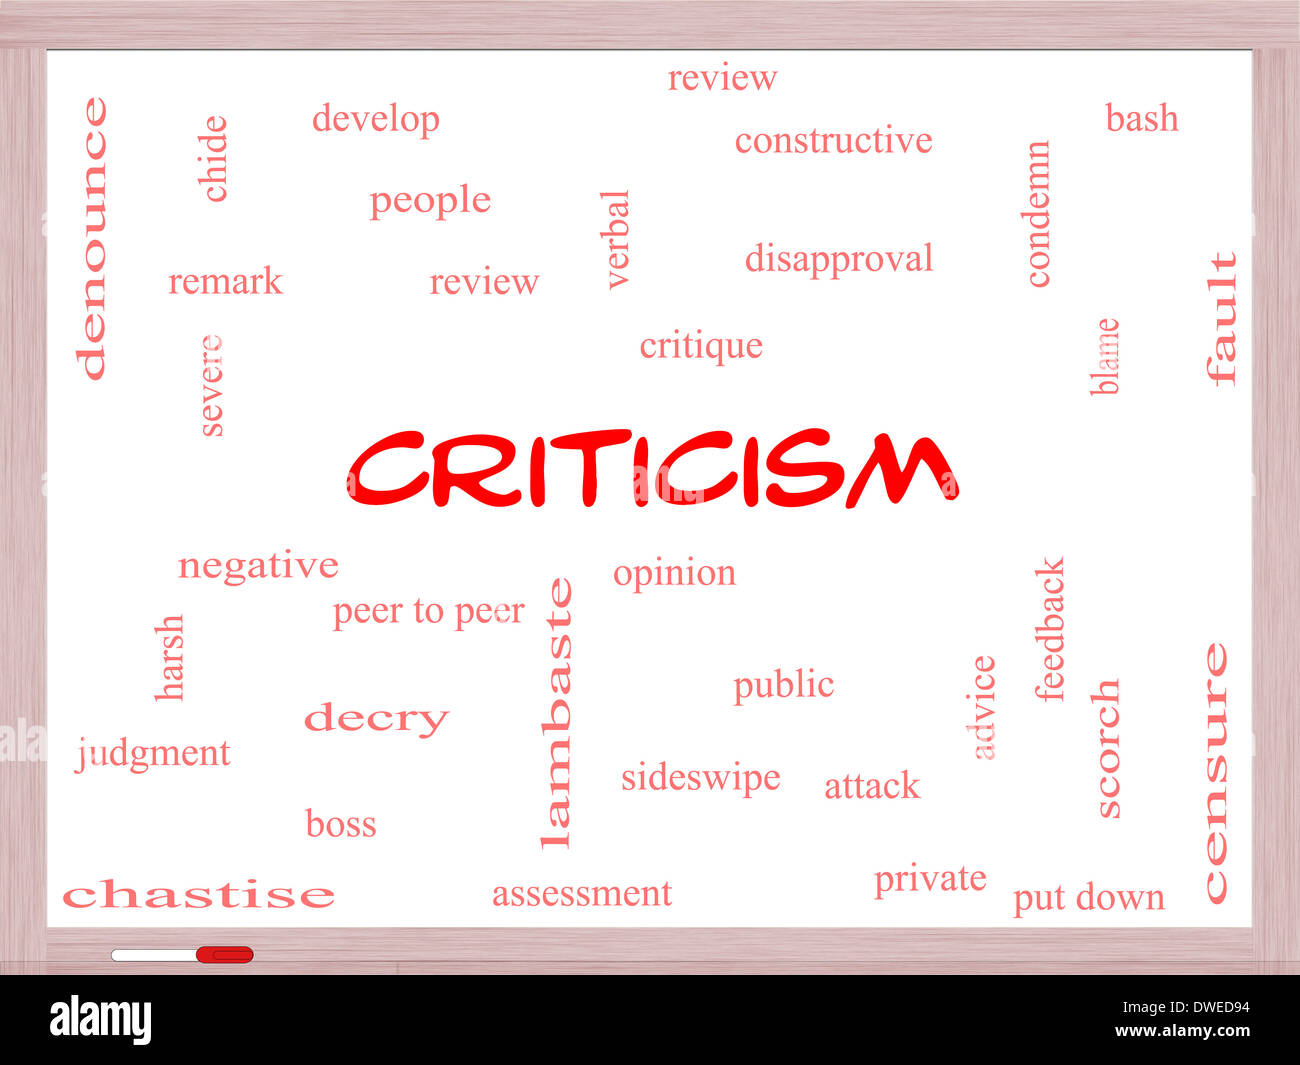 Criticism Word Cloud Concept on a Whiteboard with great terms such as opinion, blame, critique and more. Stock Photo